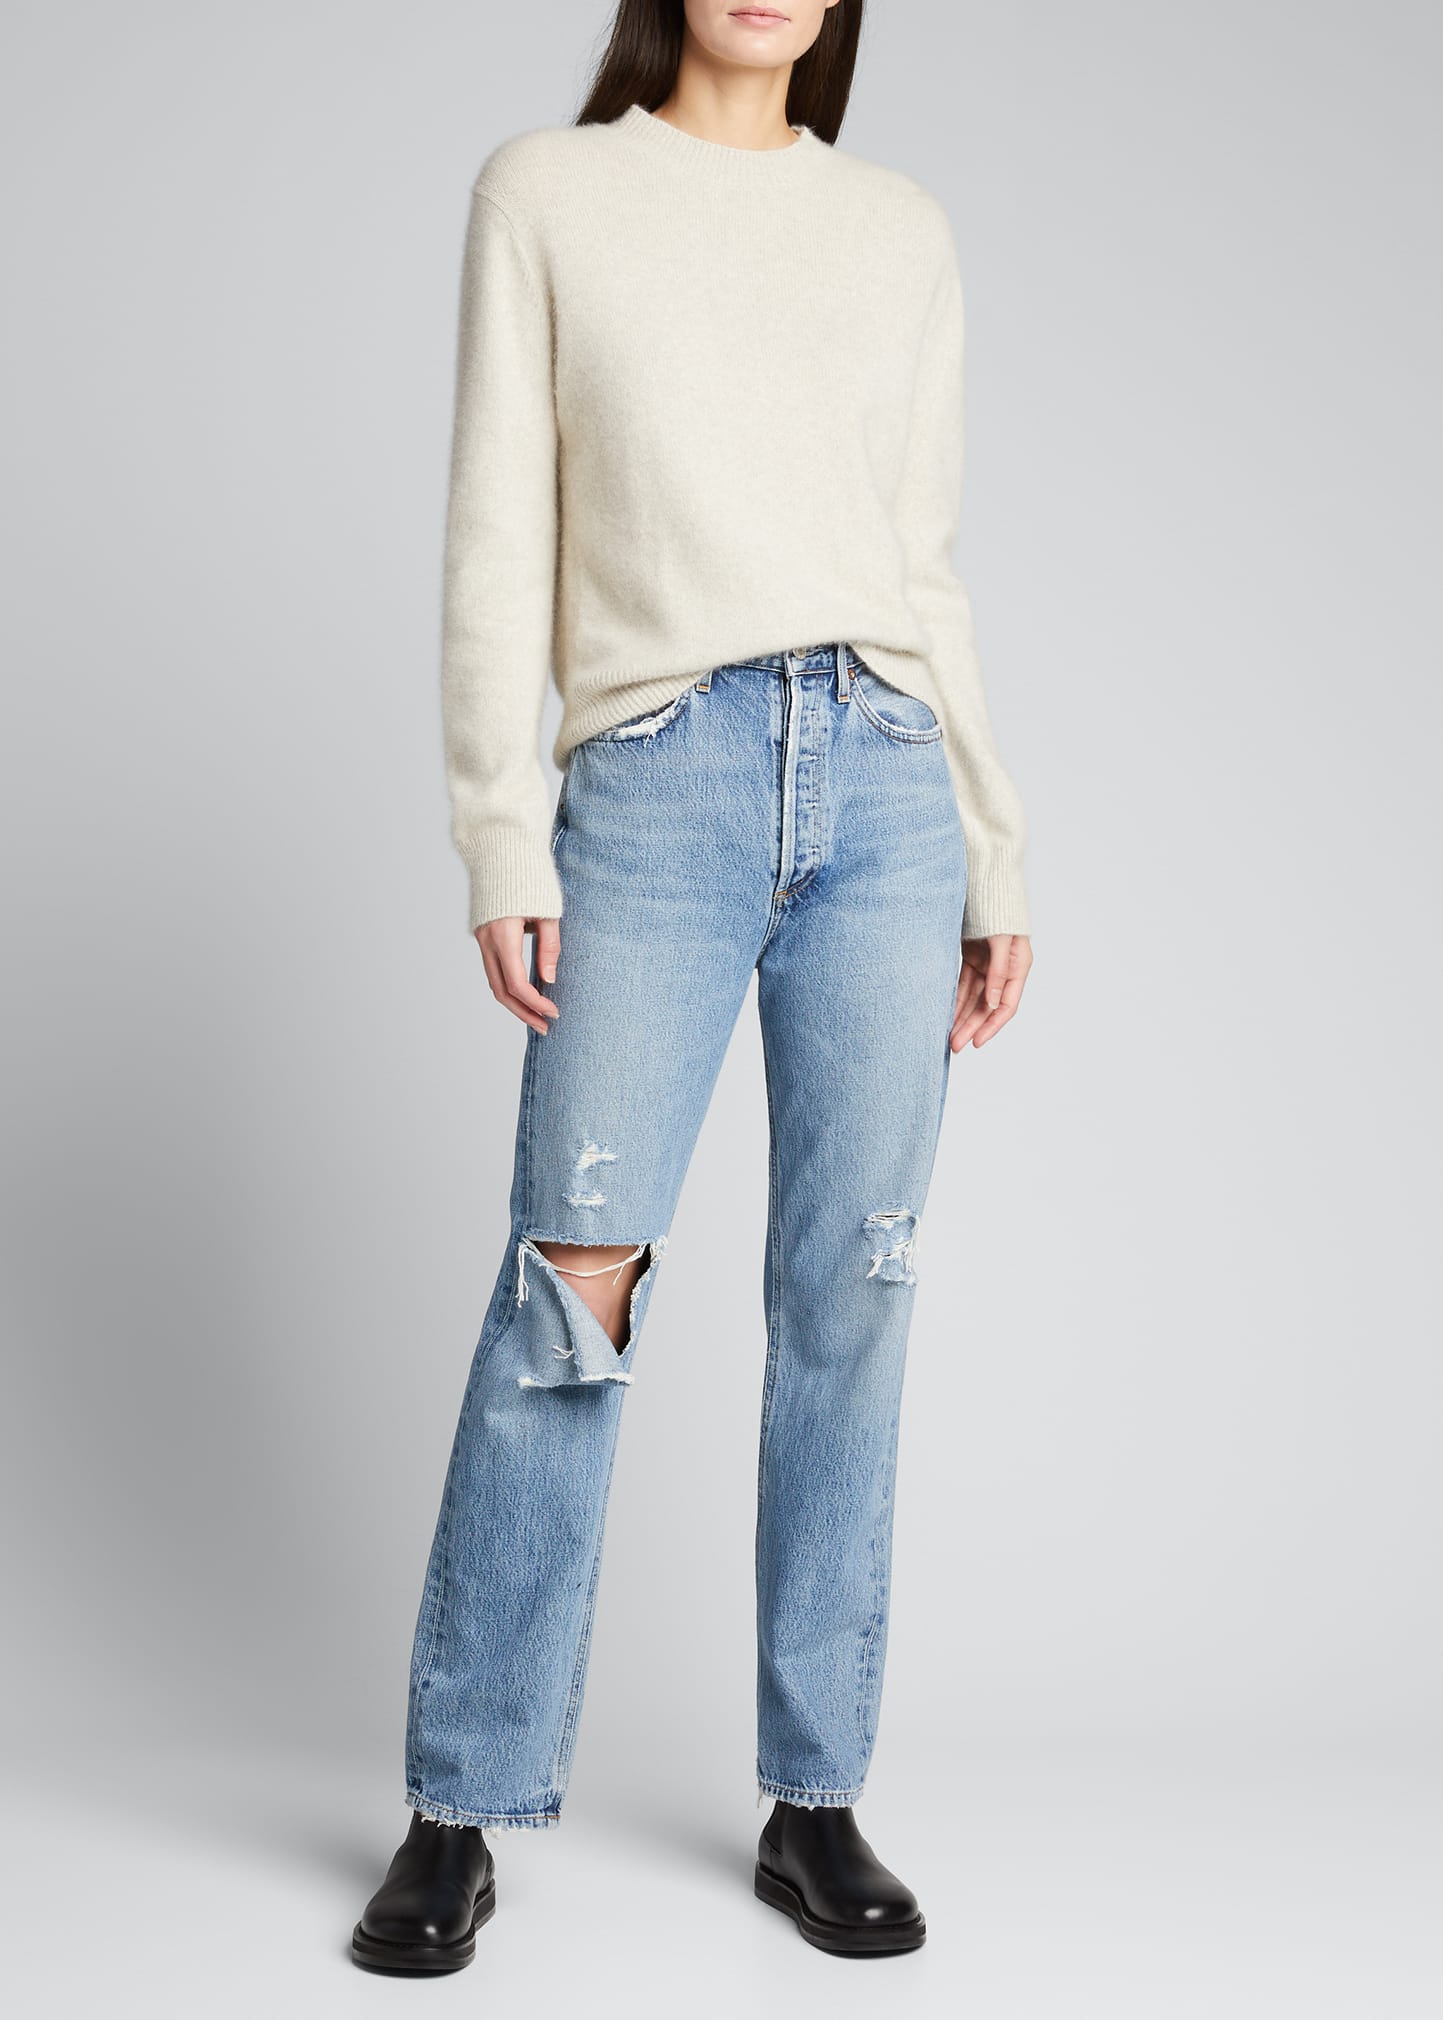 AGOLDE 90s Pinch-Waist Distressed Jeans